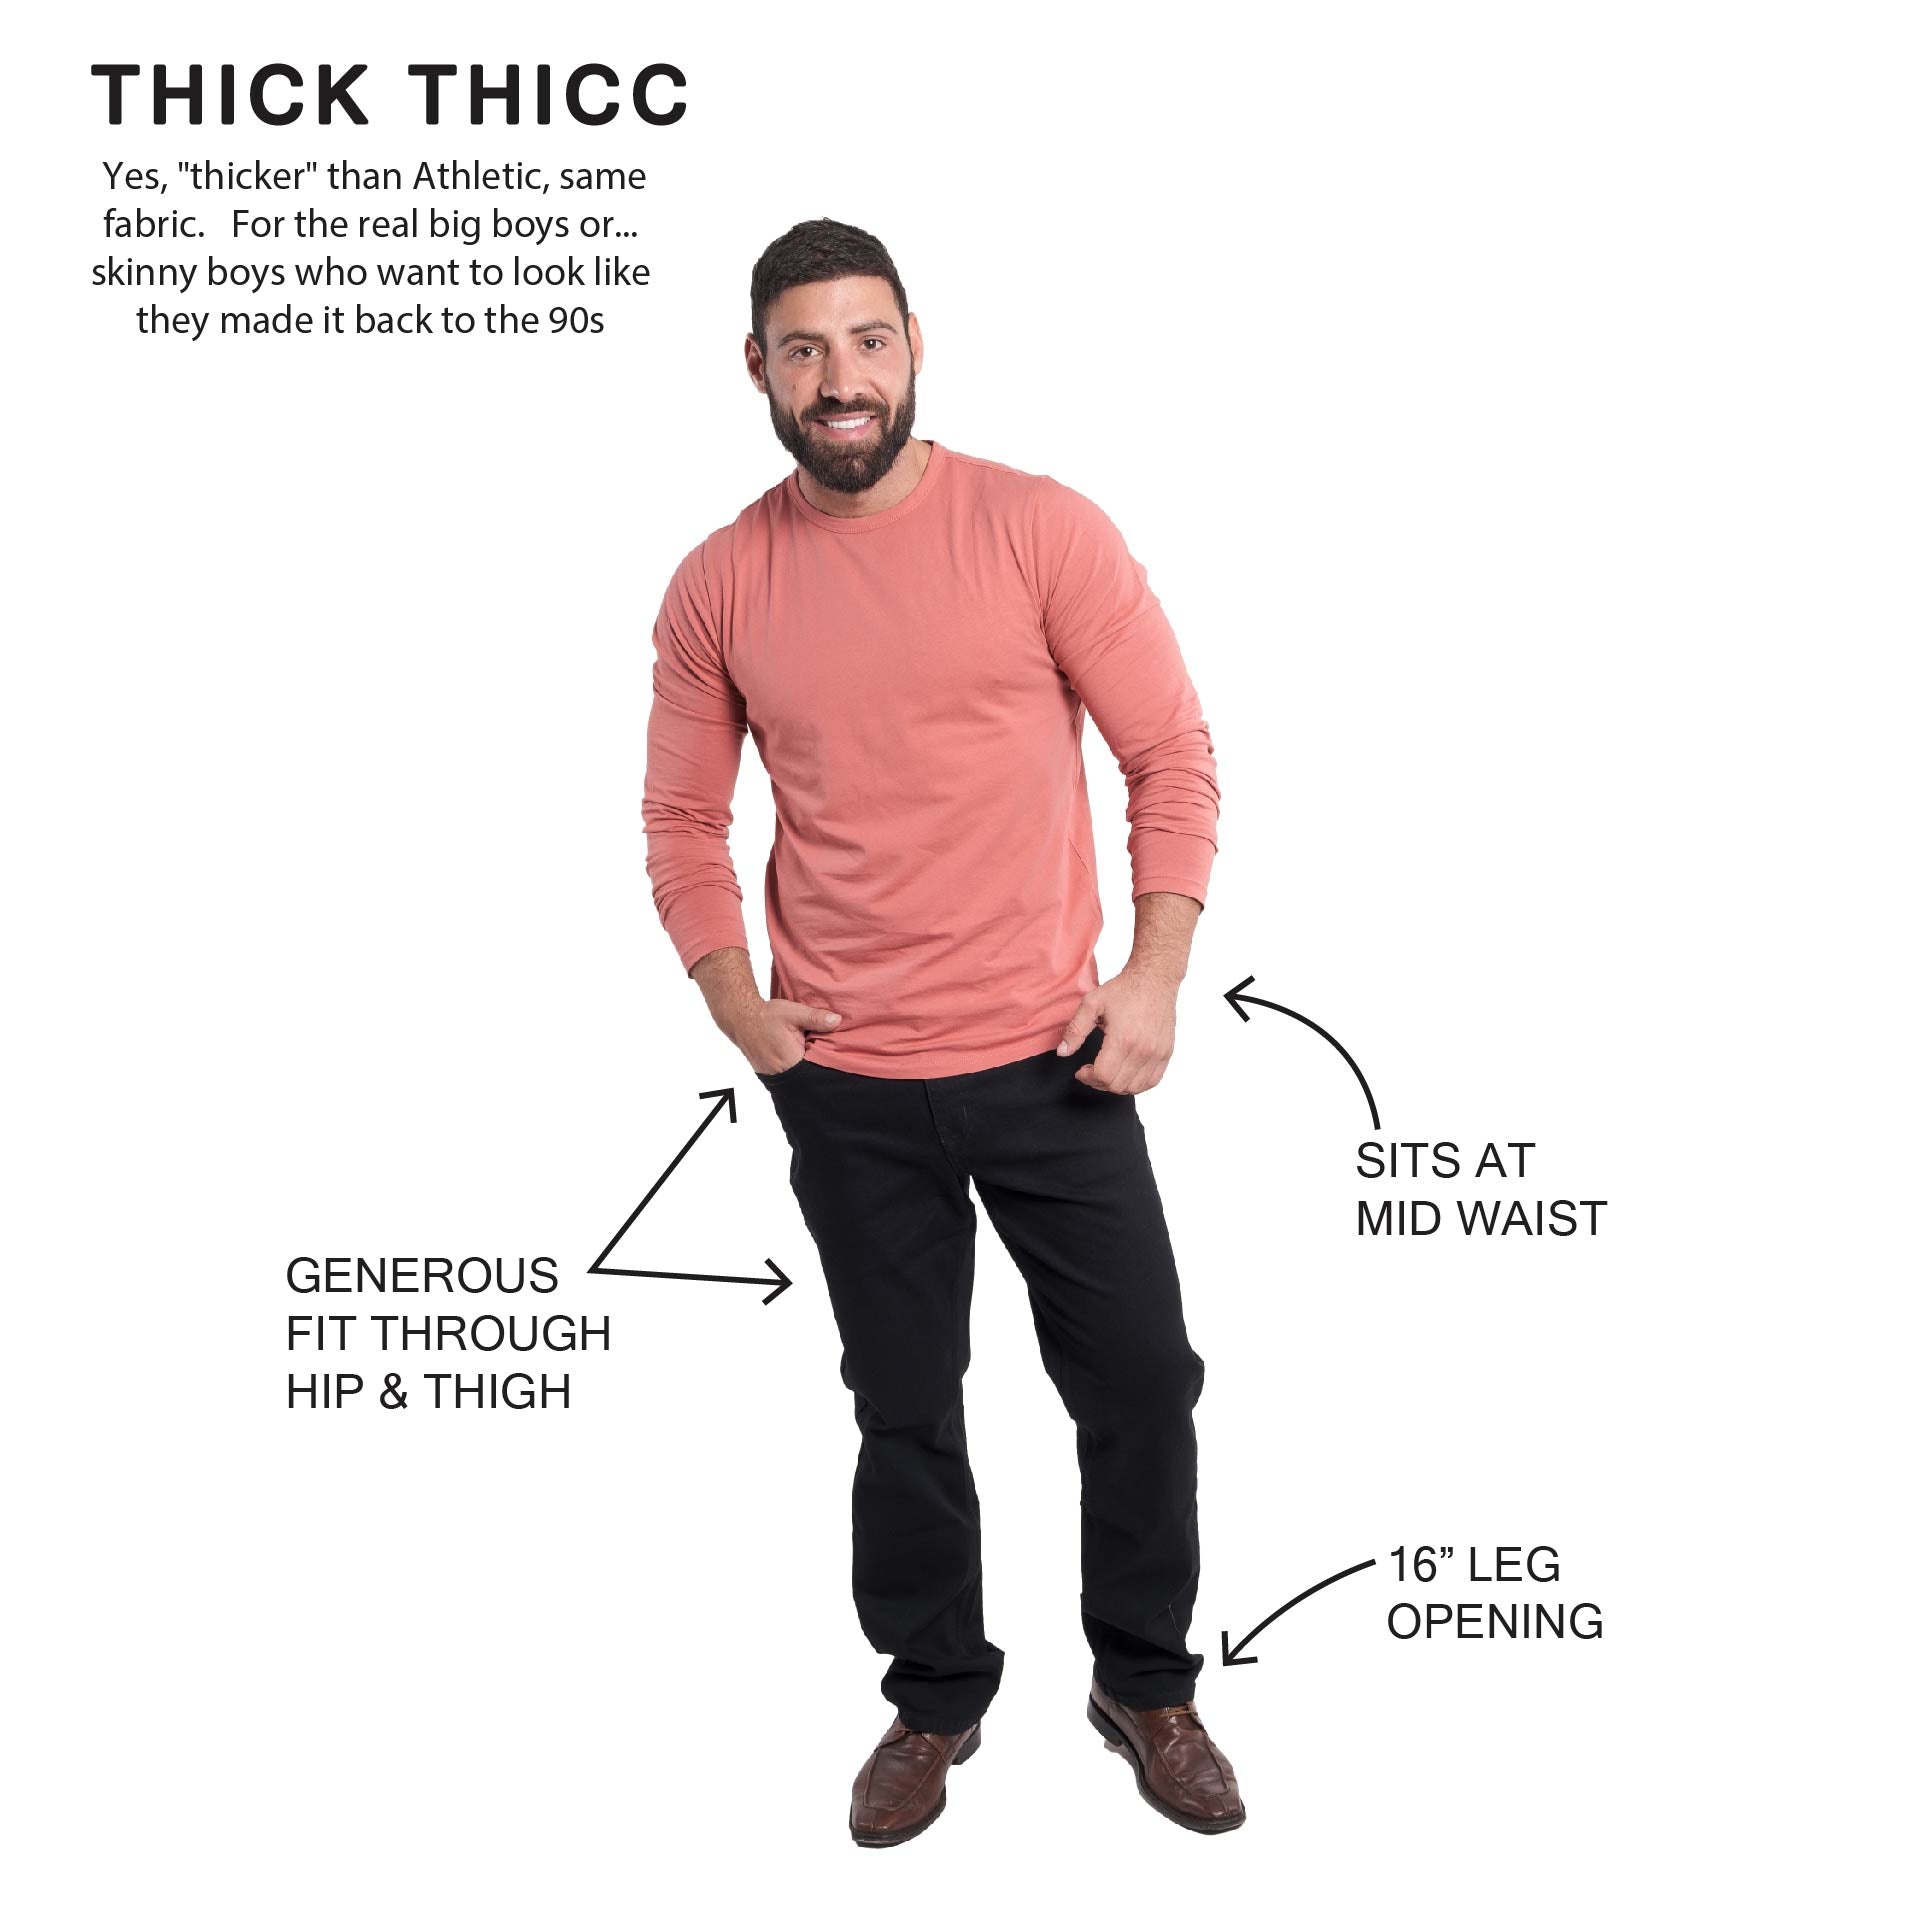 Thick Thicc Fit / Bandit (Black)